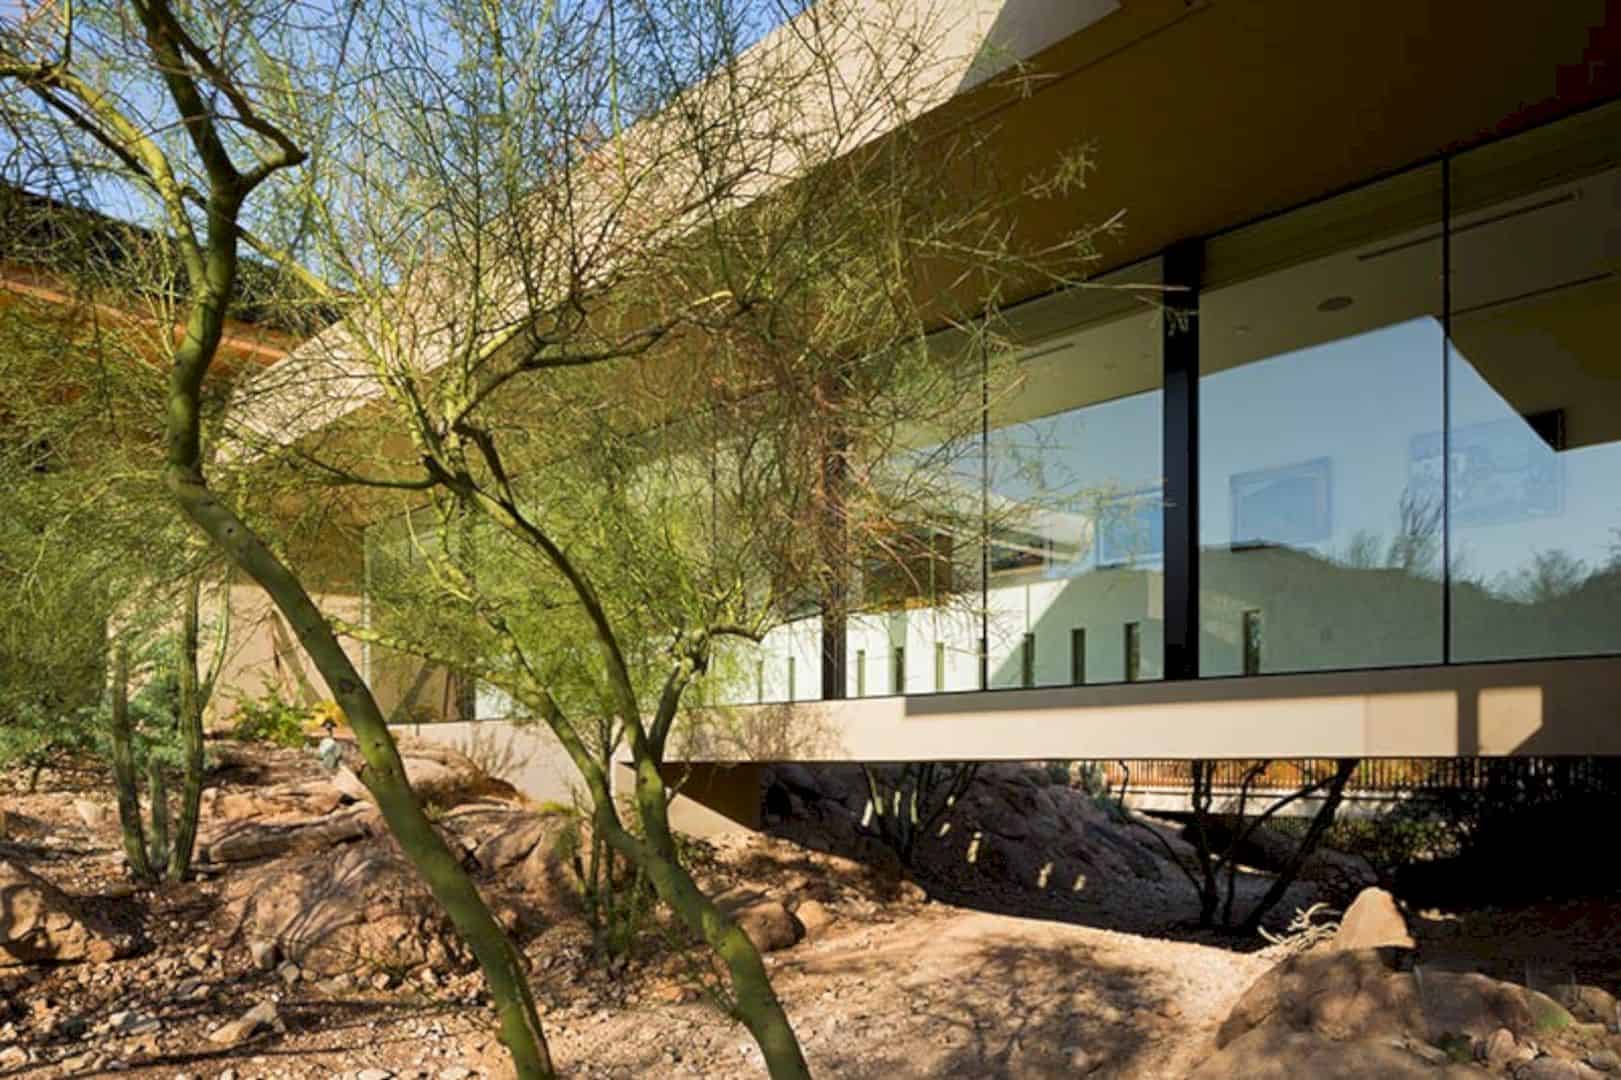 Desert Wash Residence A Modern Desert Home Defining Paradise Valleys Topographical Feature 14